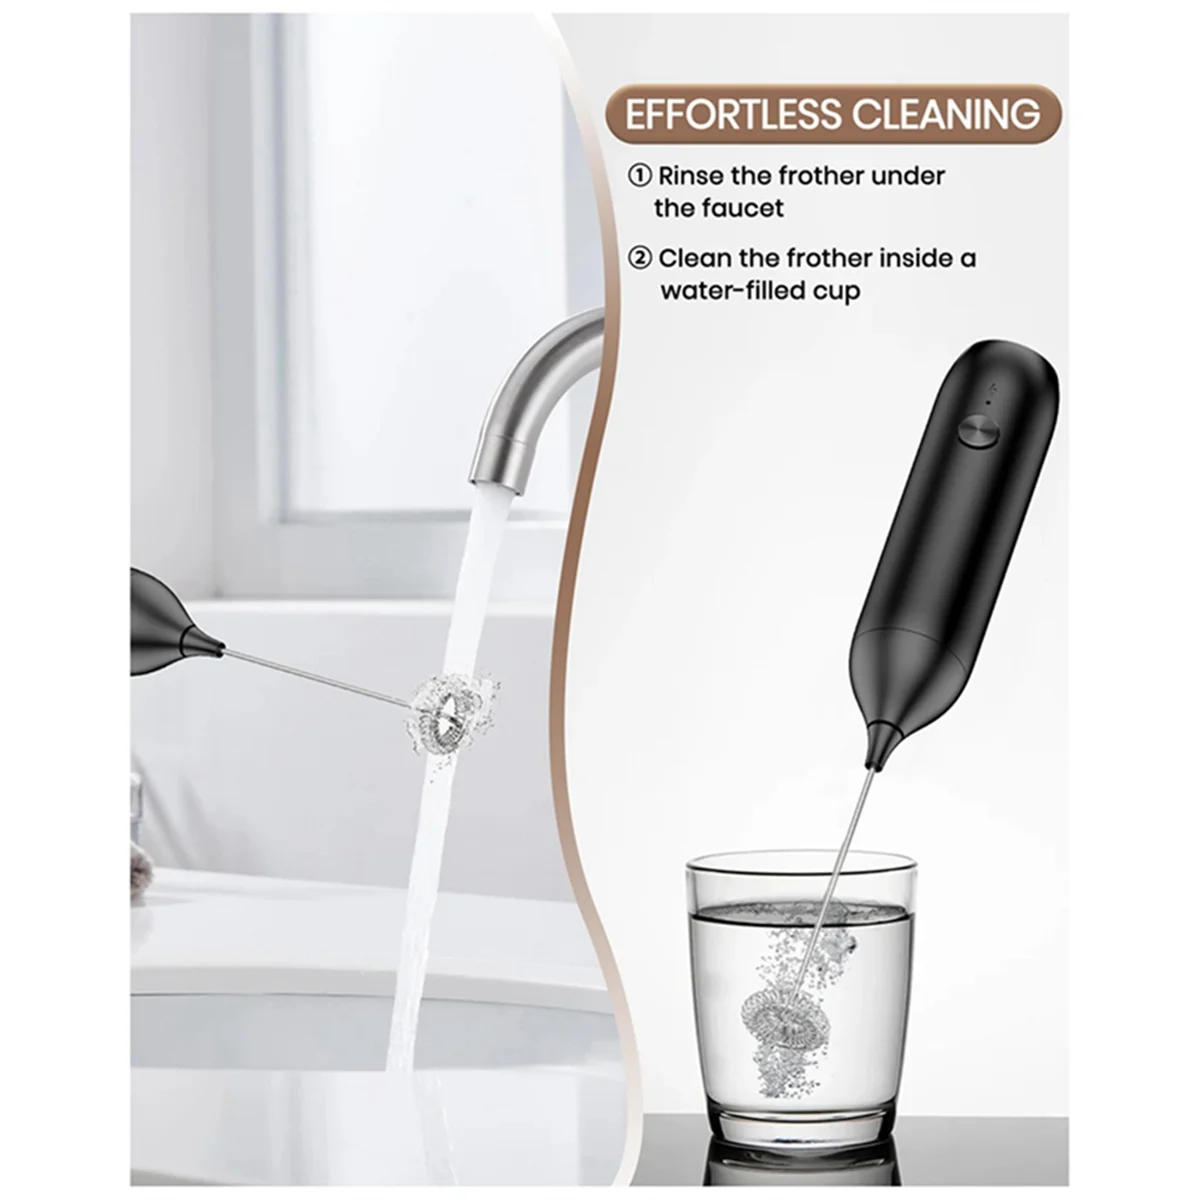 

Coffee Frother Rechargeable, Coffee Frother Handheld Coffee Frother Handheld with Type-C Interface Frother